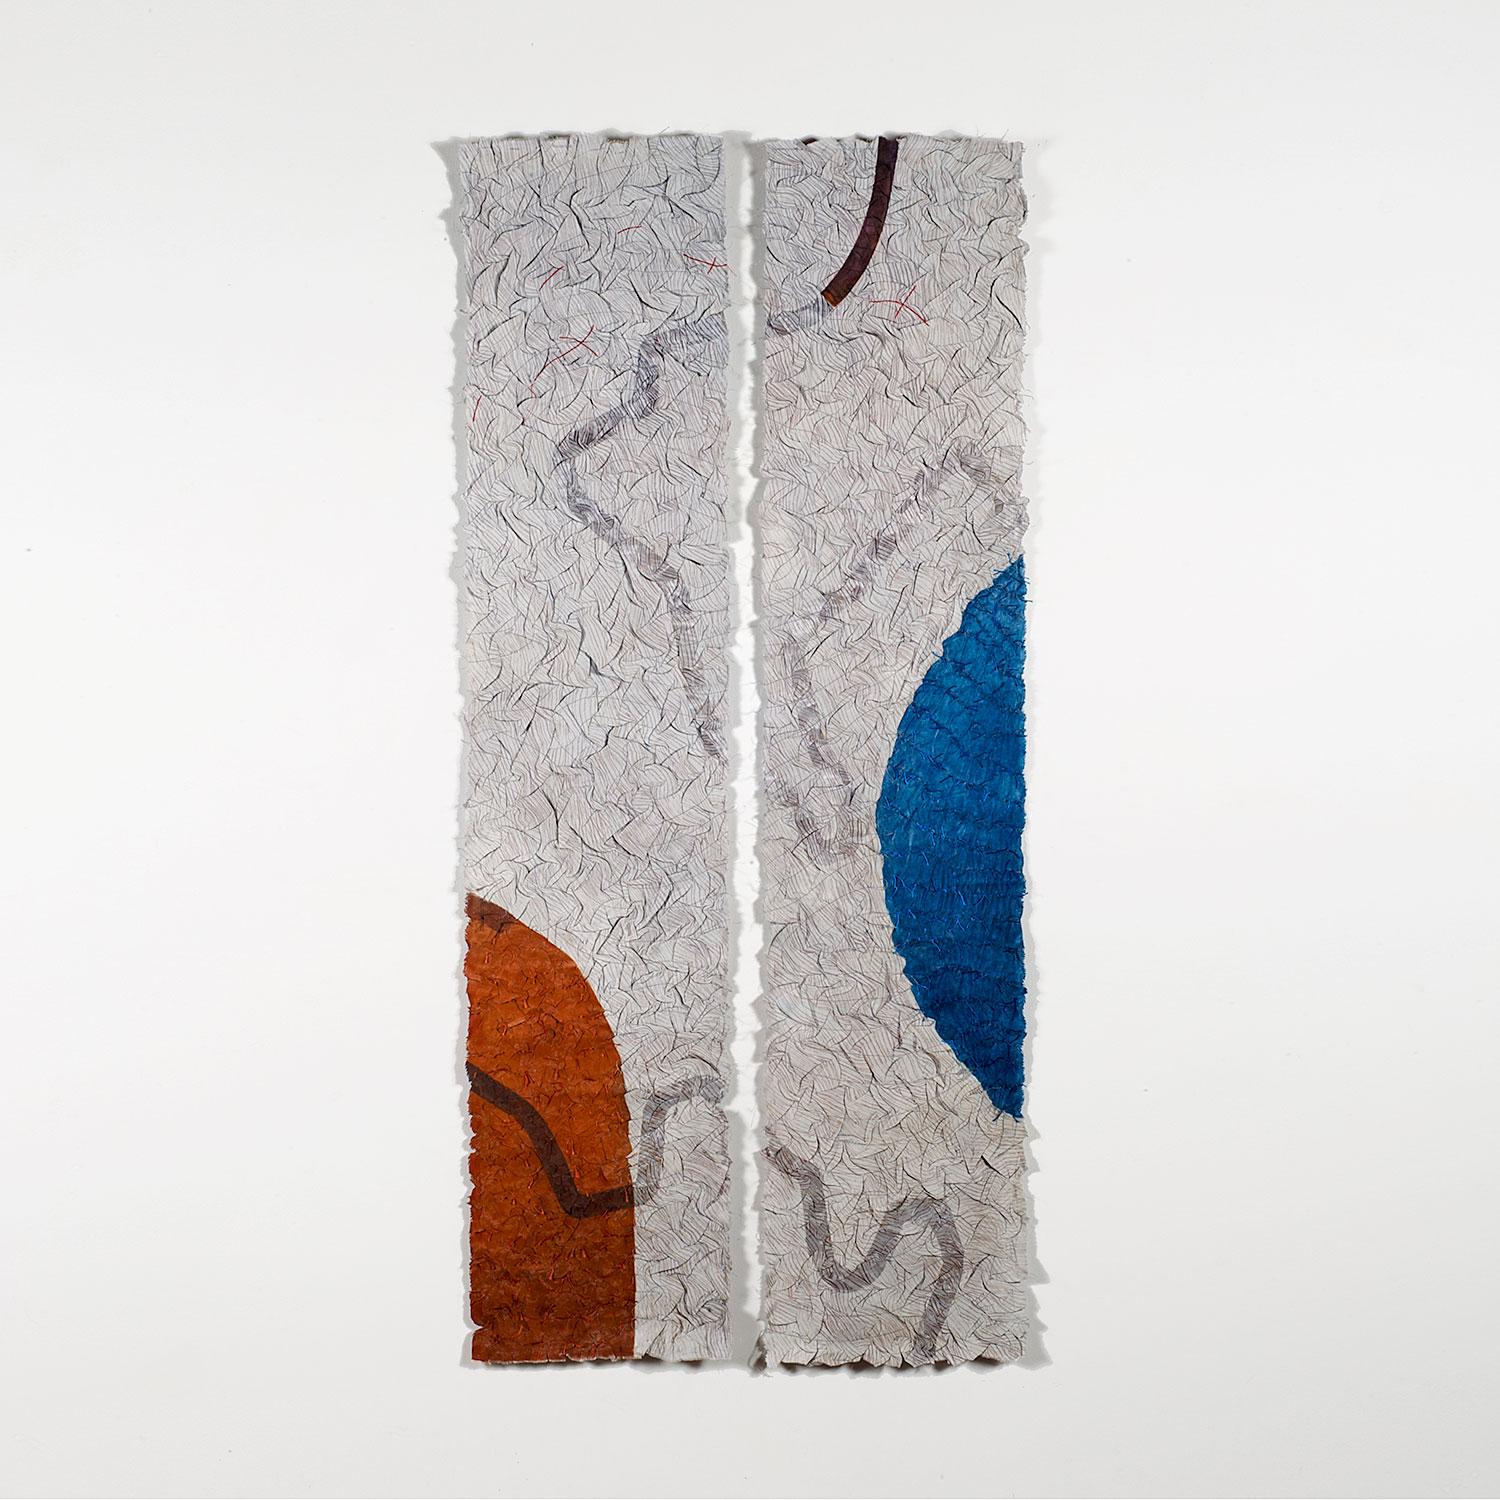 Pathways of Desire, Contemporary Abstract Tapestry, Textile Wall Sculpture 